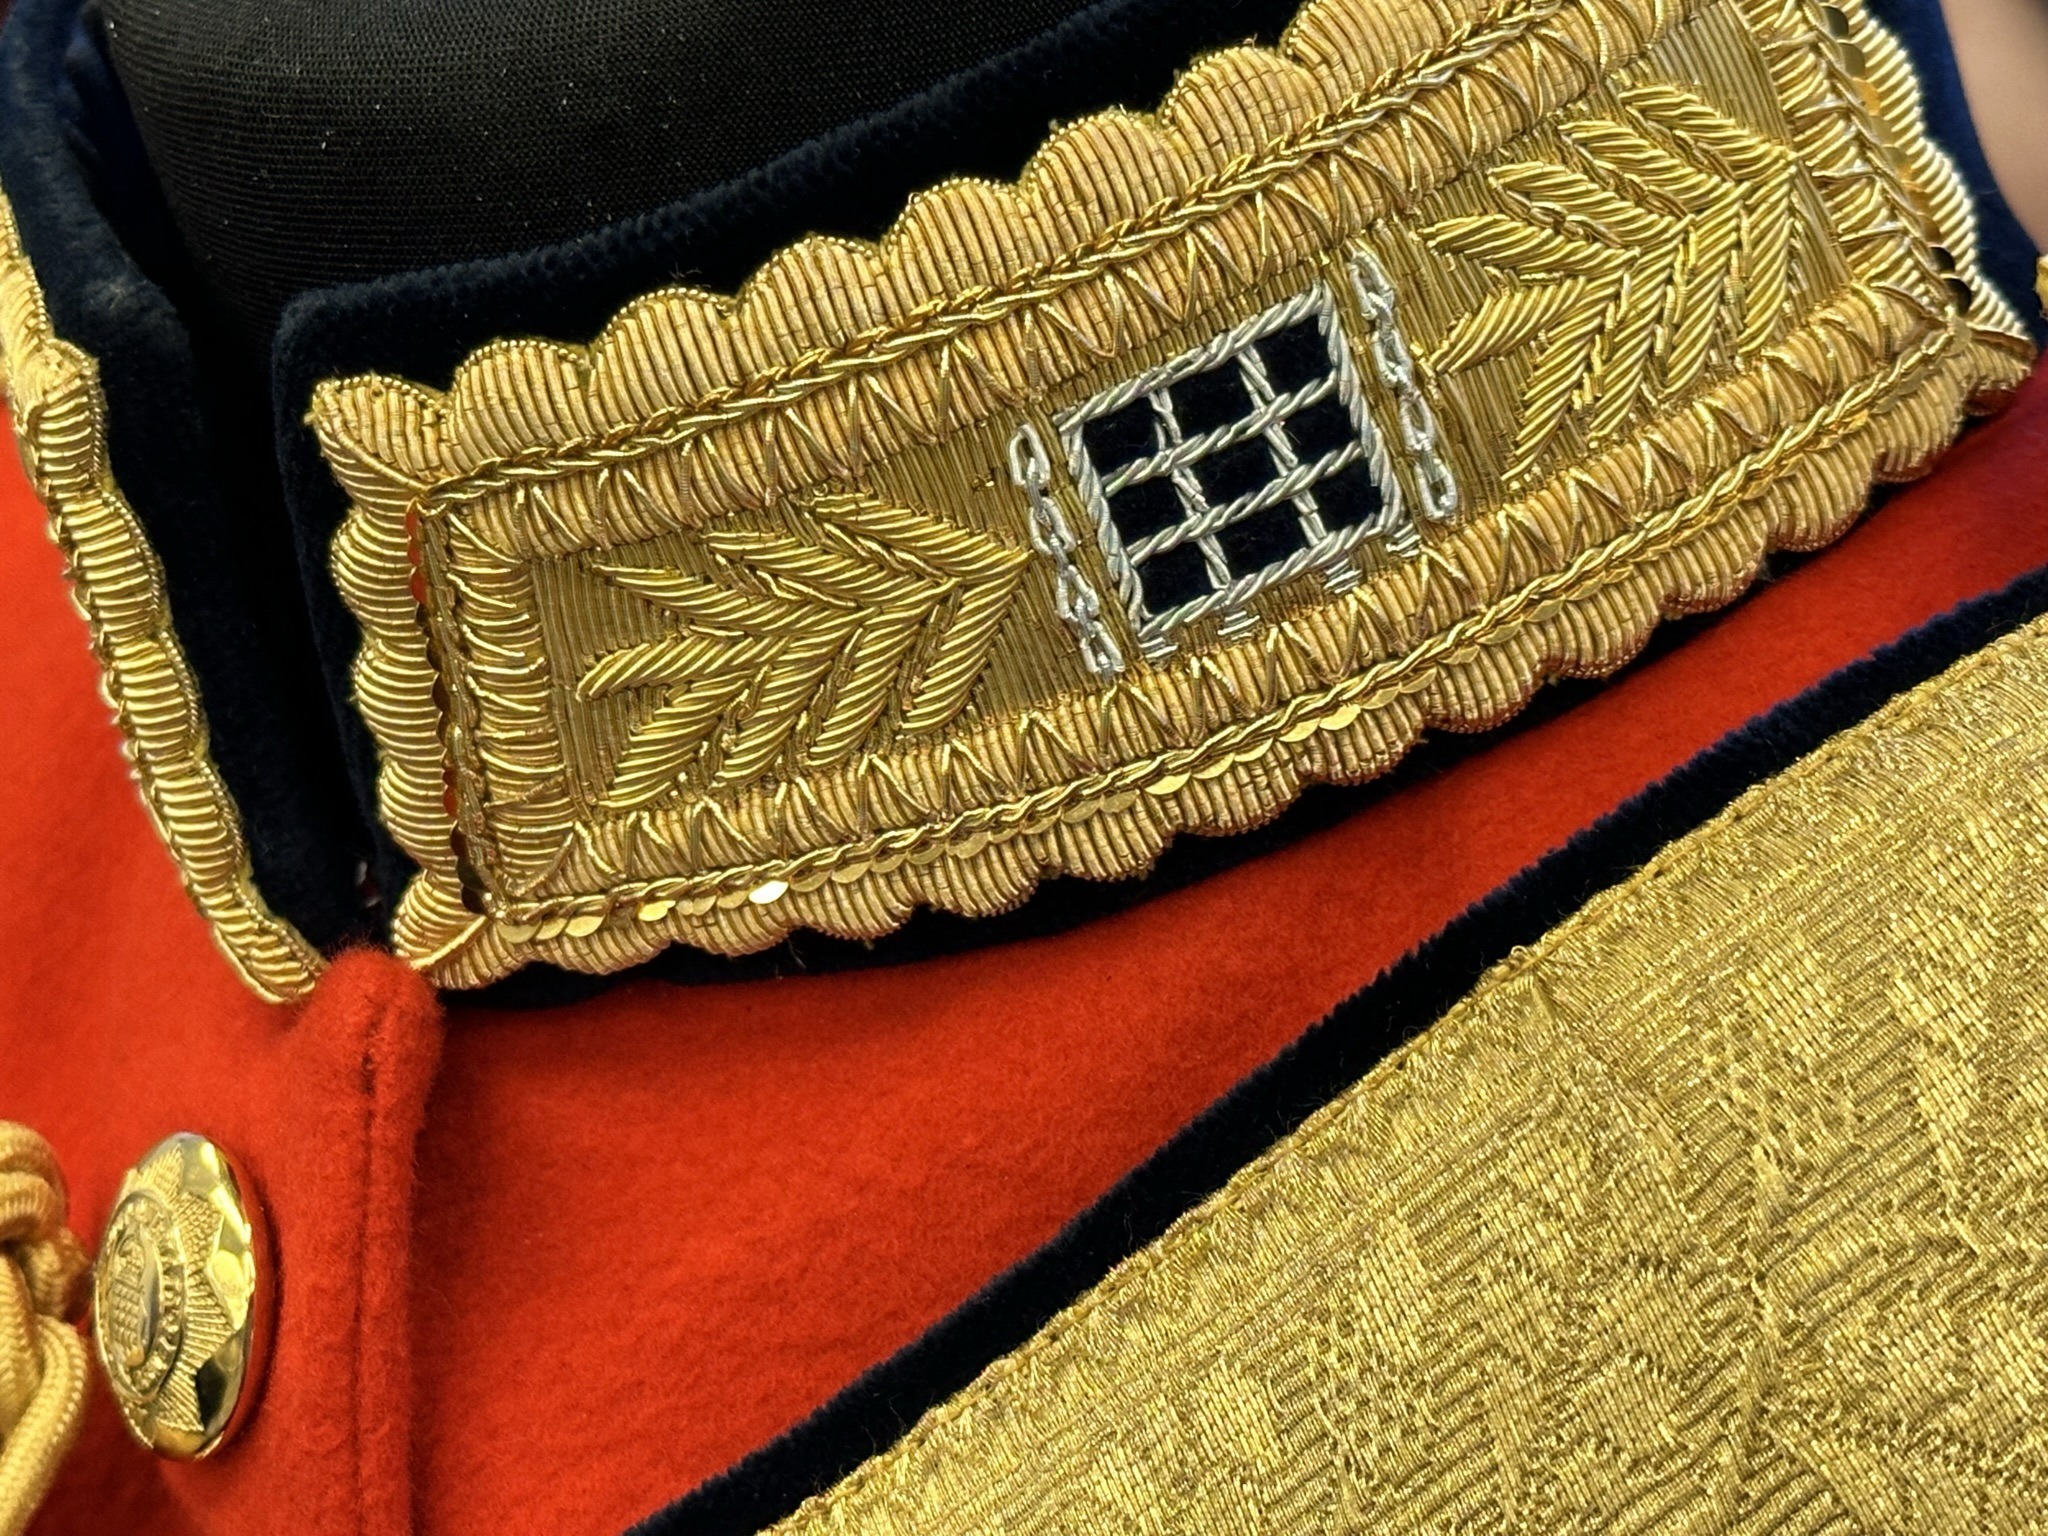 Collar embroidery. Gentlemen at Arms ceremonial uniform, the ceremonial bodyguard of King Charles III, which was founded by King Henry VIII in 1509. 13-May-2023.